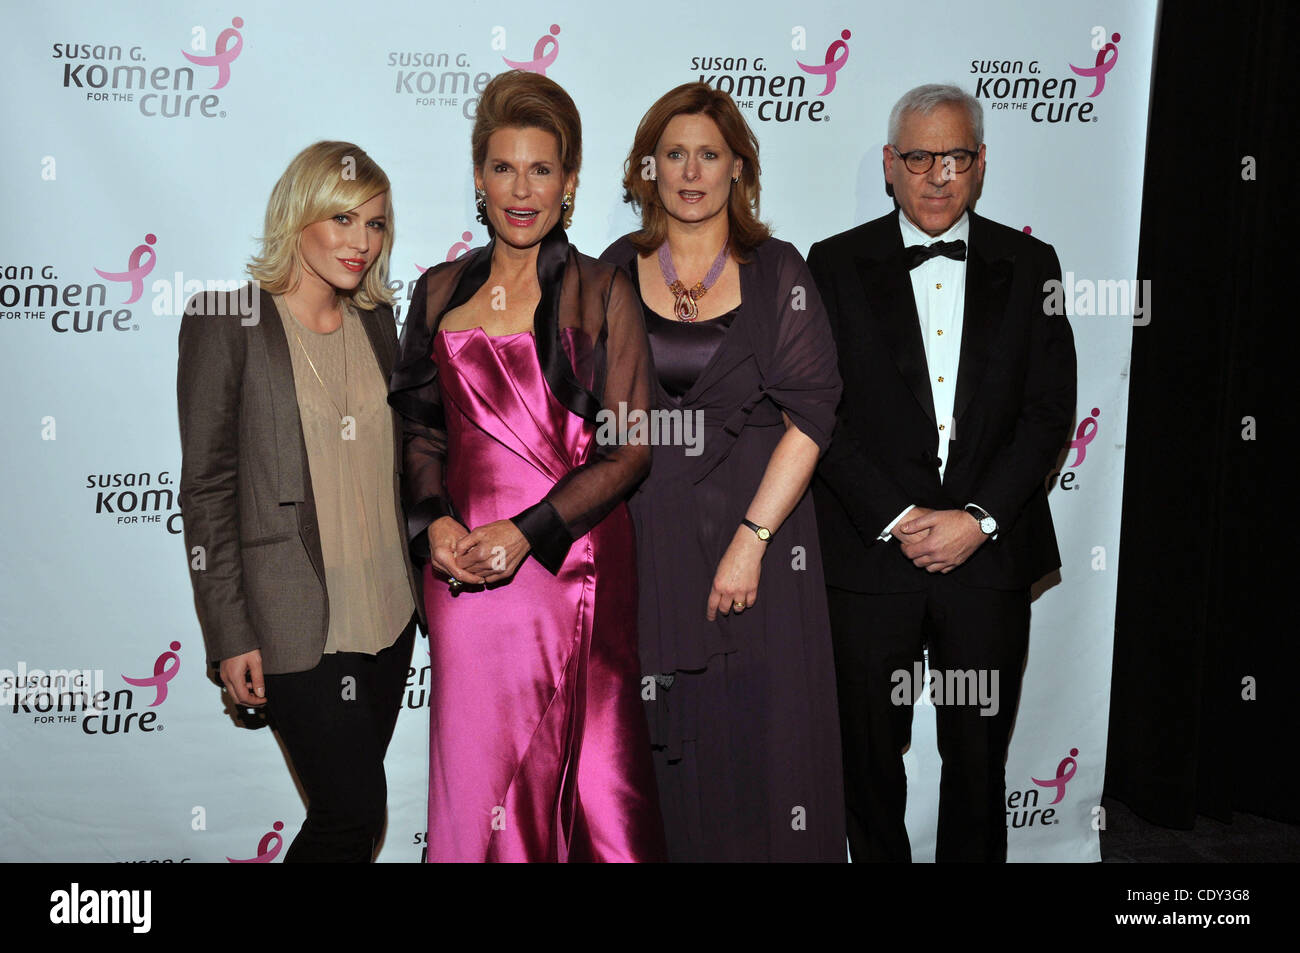 Oct. 28, 2011 - Washington, District of Columbia, U.S. - Singer NATASHA BEDINGFIELD, NANCY BRINKER, SARAH BROWN, DAVID RUBENSTEIN attending the Susan G. Komen for the Cure's Honoring the Promise Benefit held at the John F. Kennedy Center for the Performing Arts located in Washington, DC (Credit Imag Stock Photo